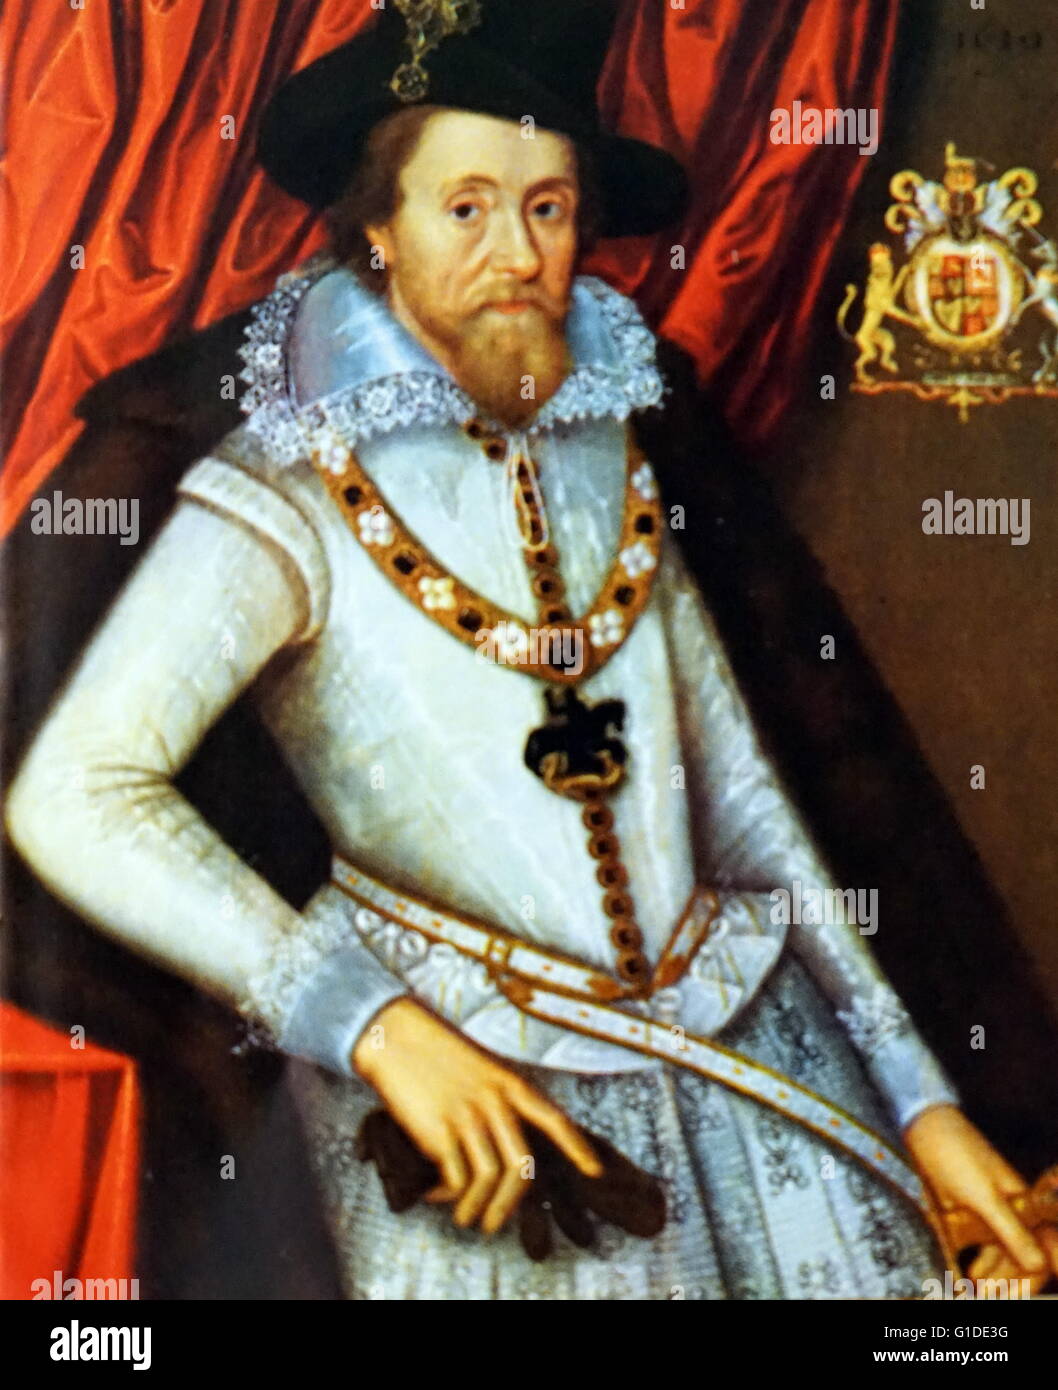 Portrait of James VI and I (1566-1625) King of Scotland, England, and Ireland. Dated 17th Century Stock Photo